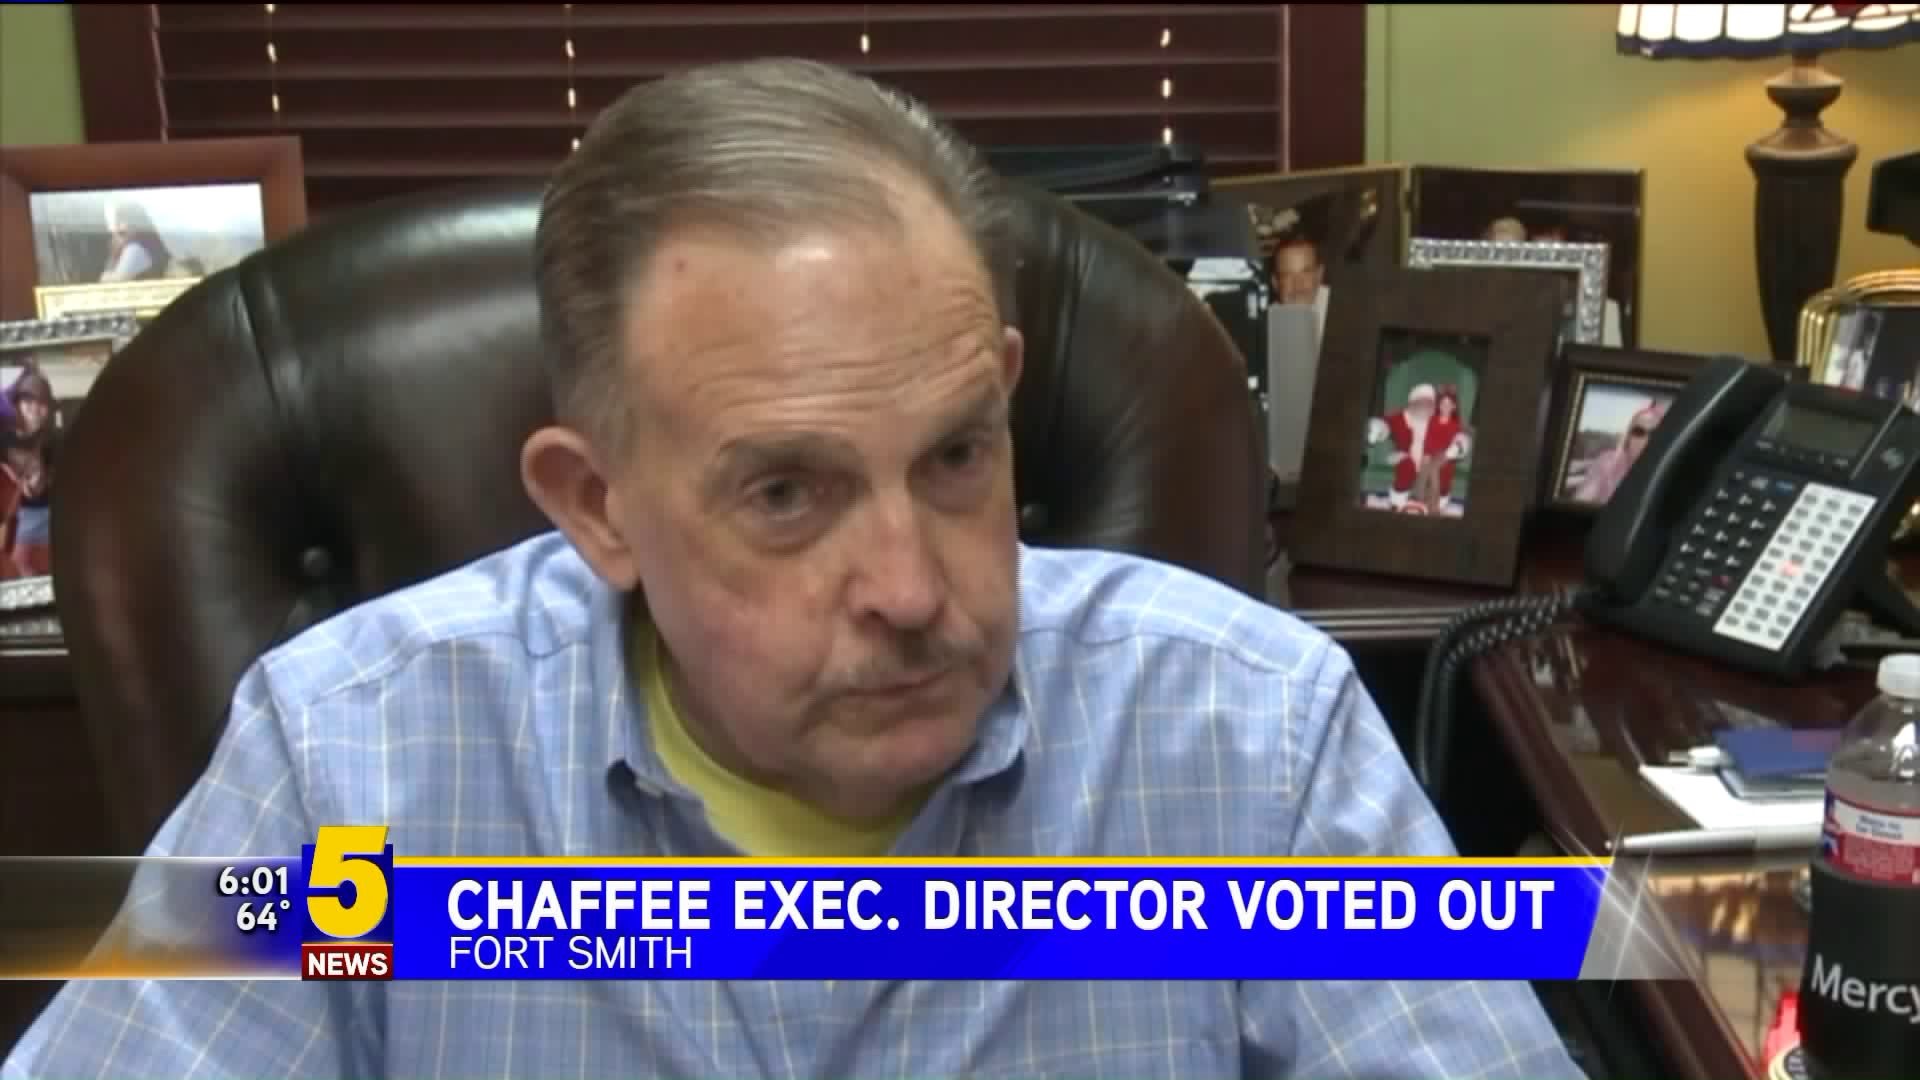 Chaffee Exec. Director Voted Out